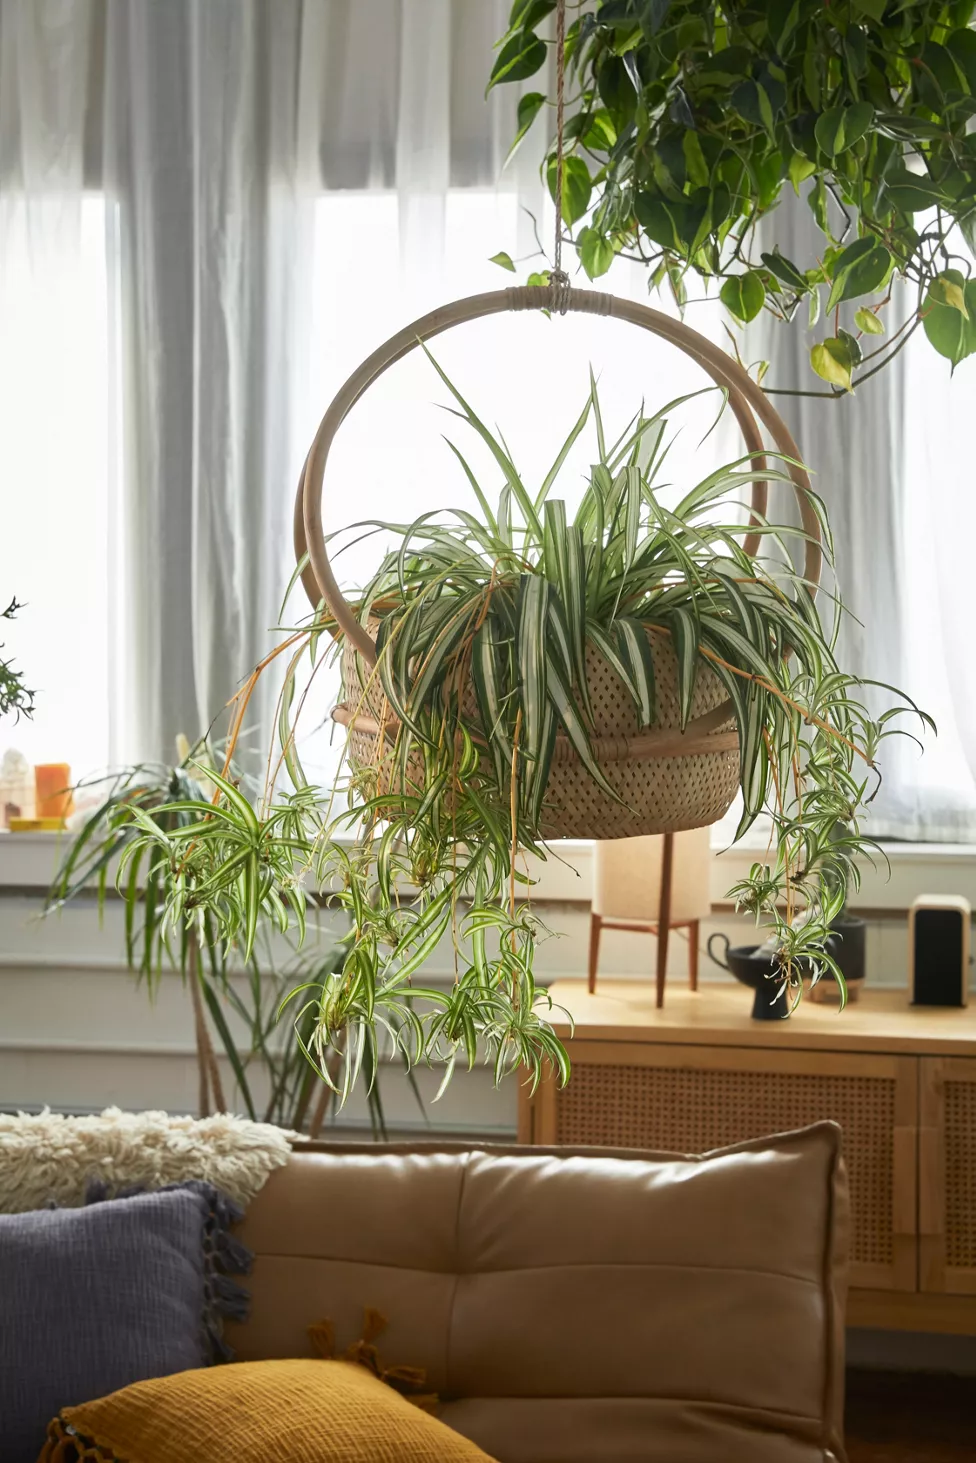 Show Off Vining Plants with a Hanging Planter